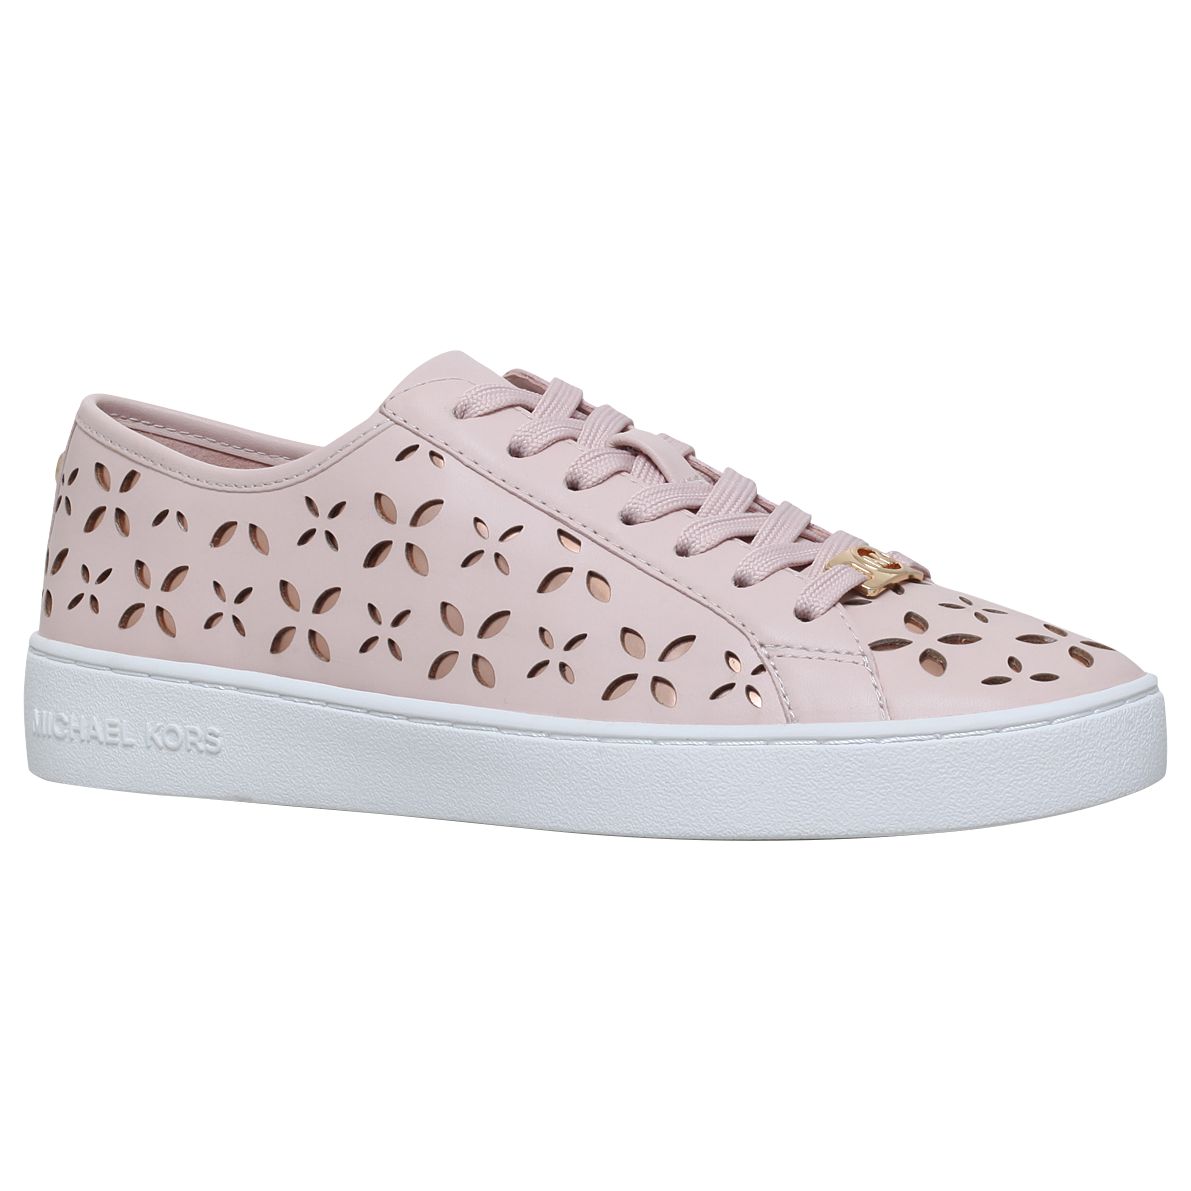 MICHAEL Michael Kors Keaton Cut Out Lace Up Trainers